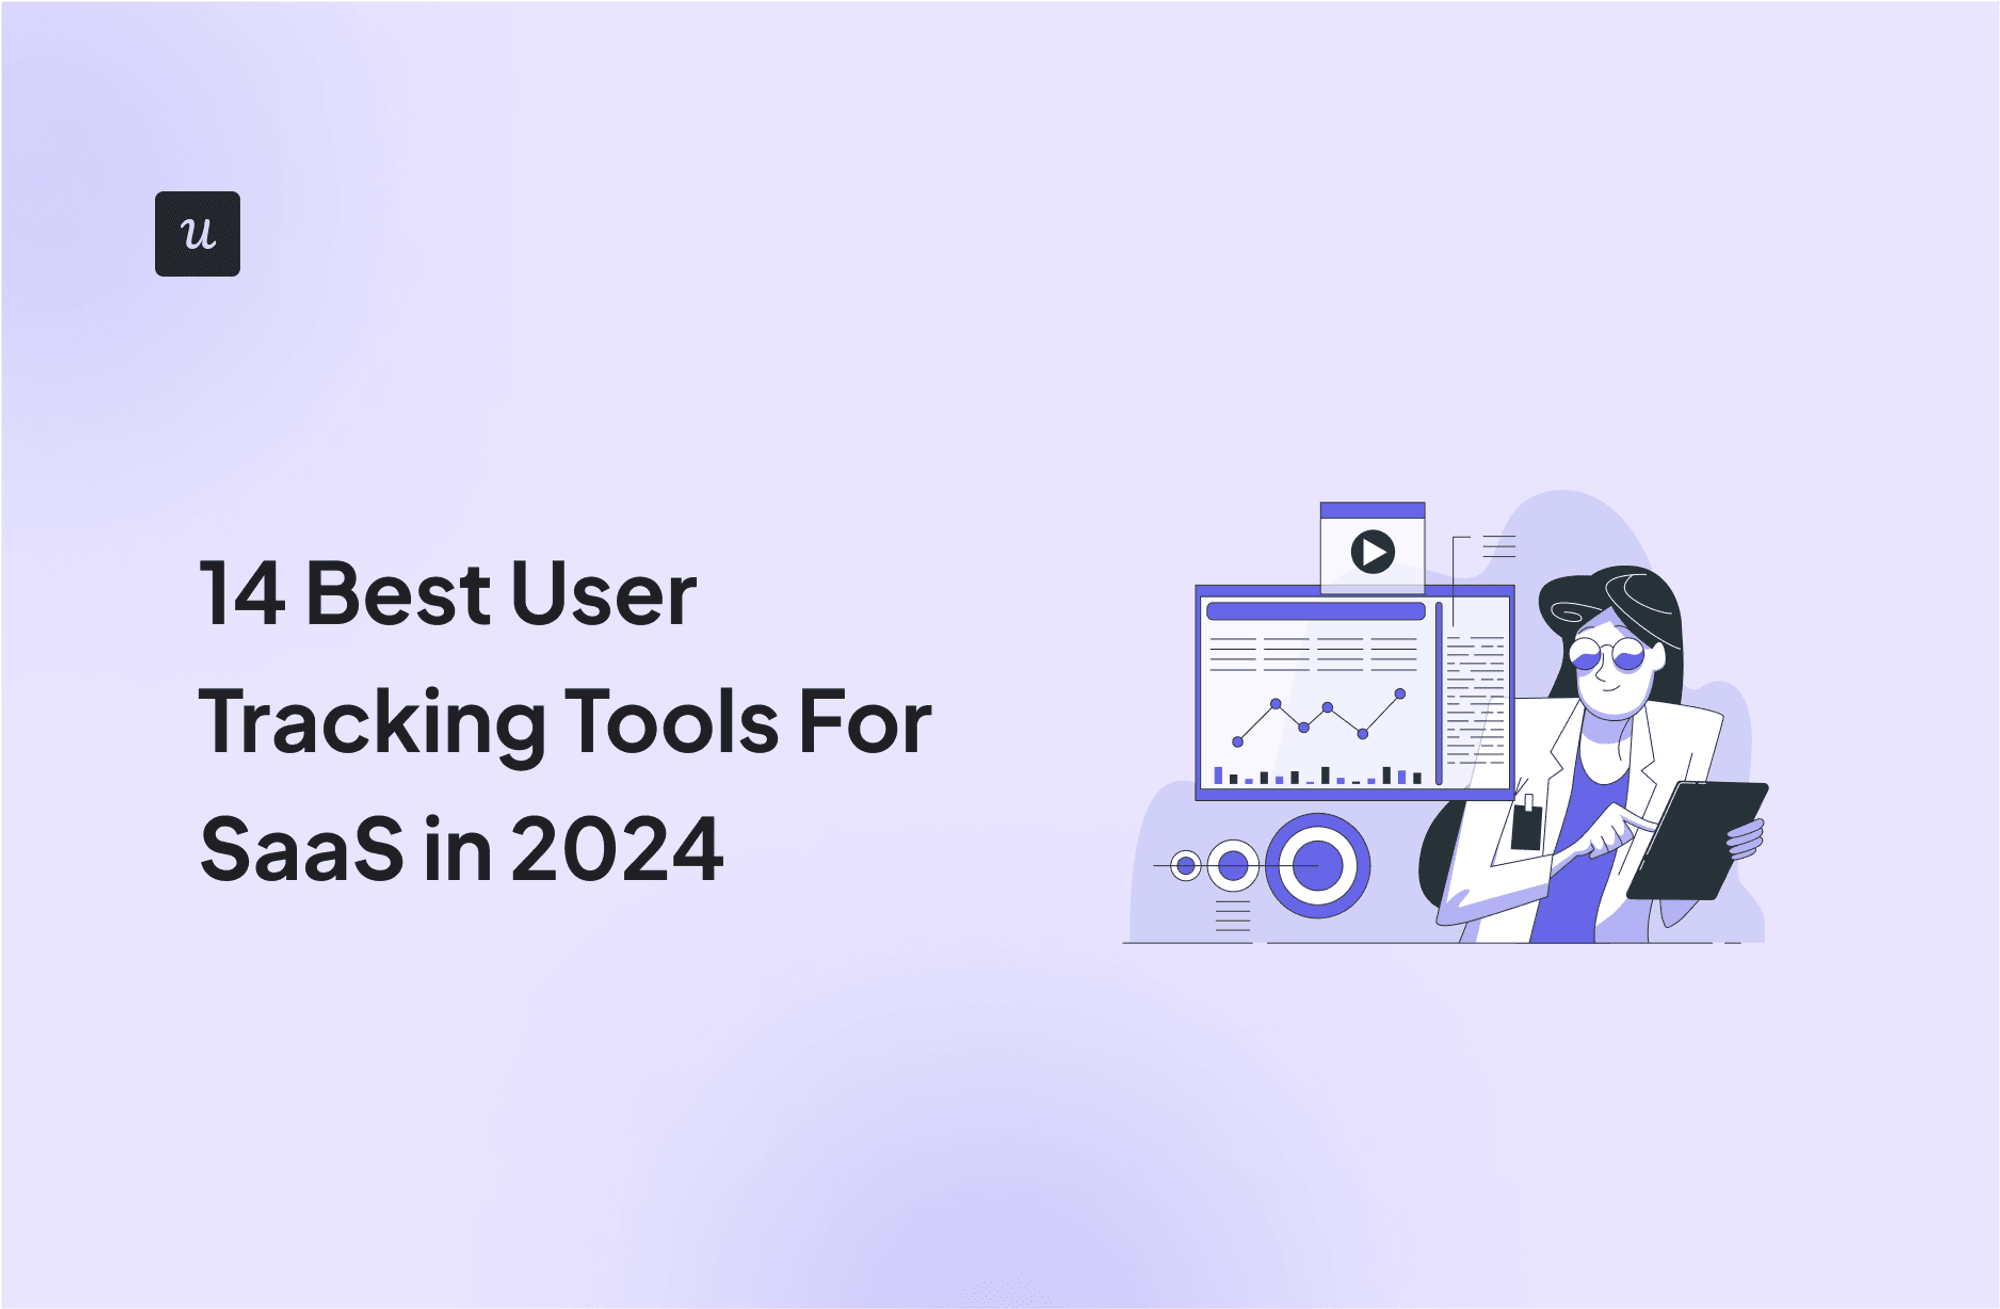 14 Best User Tracking Tools For SaaS in 2024 cover